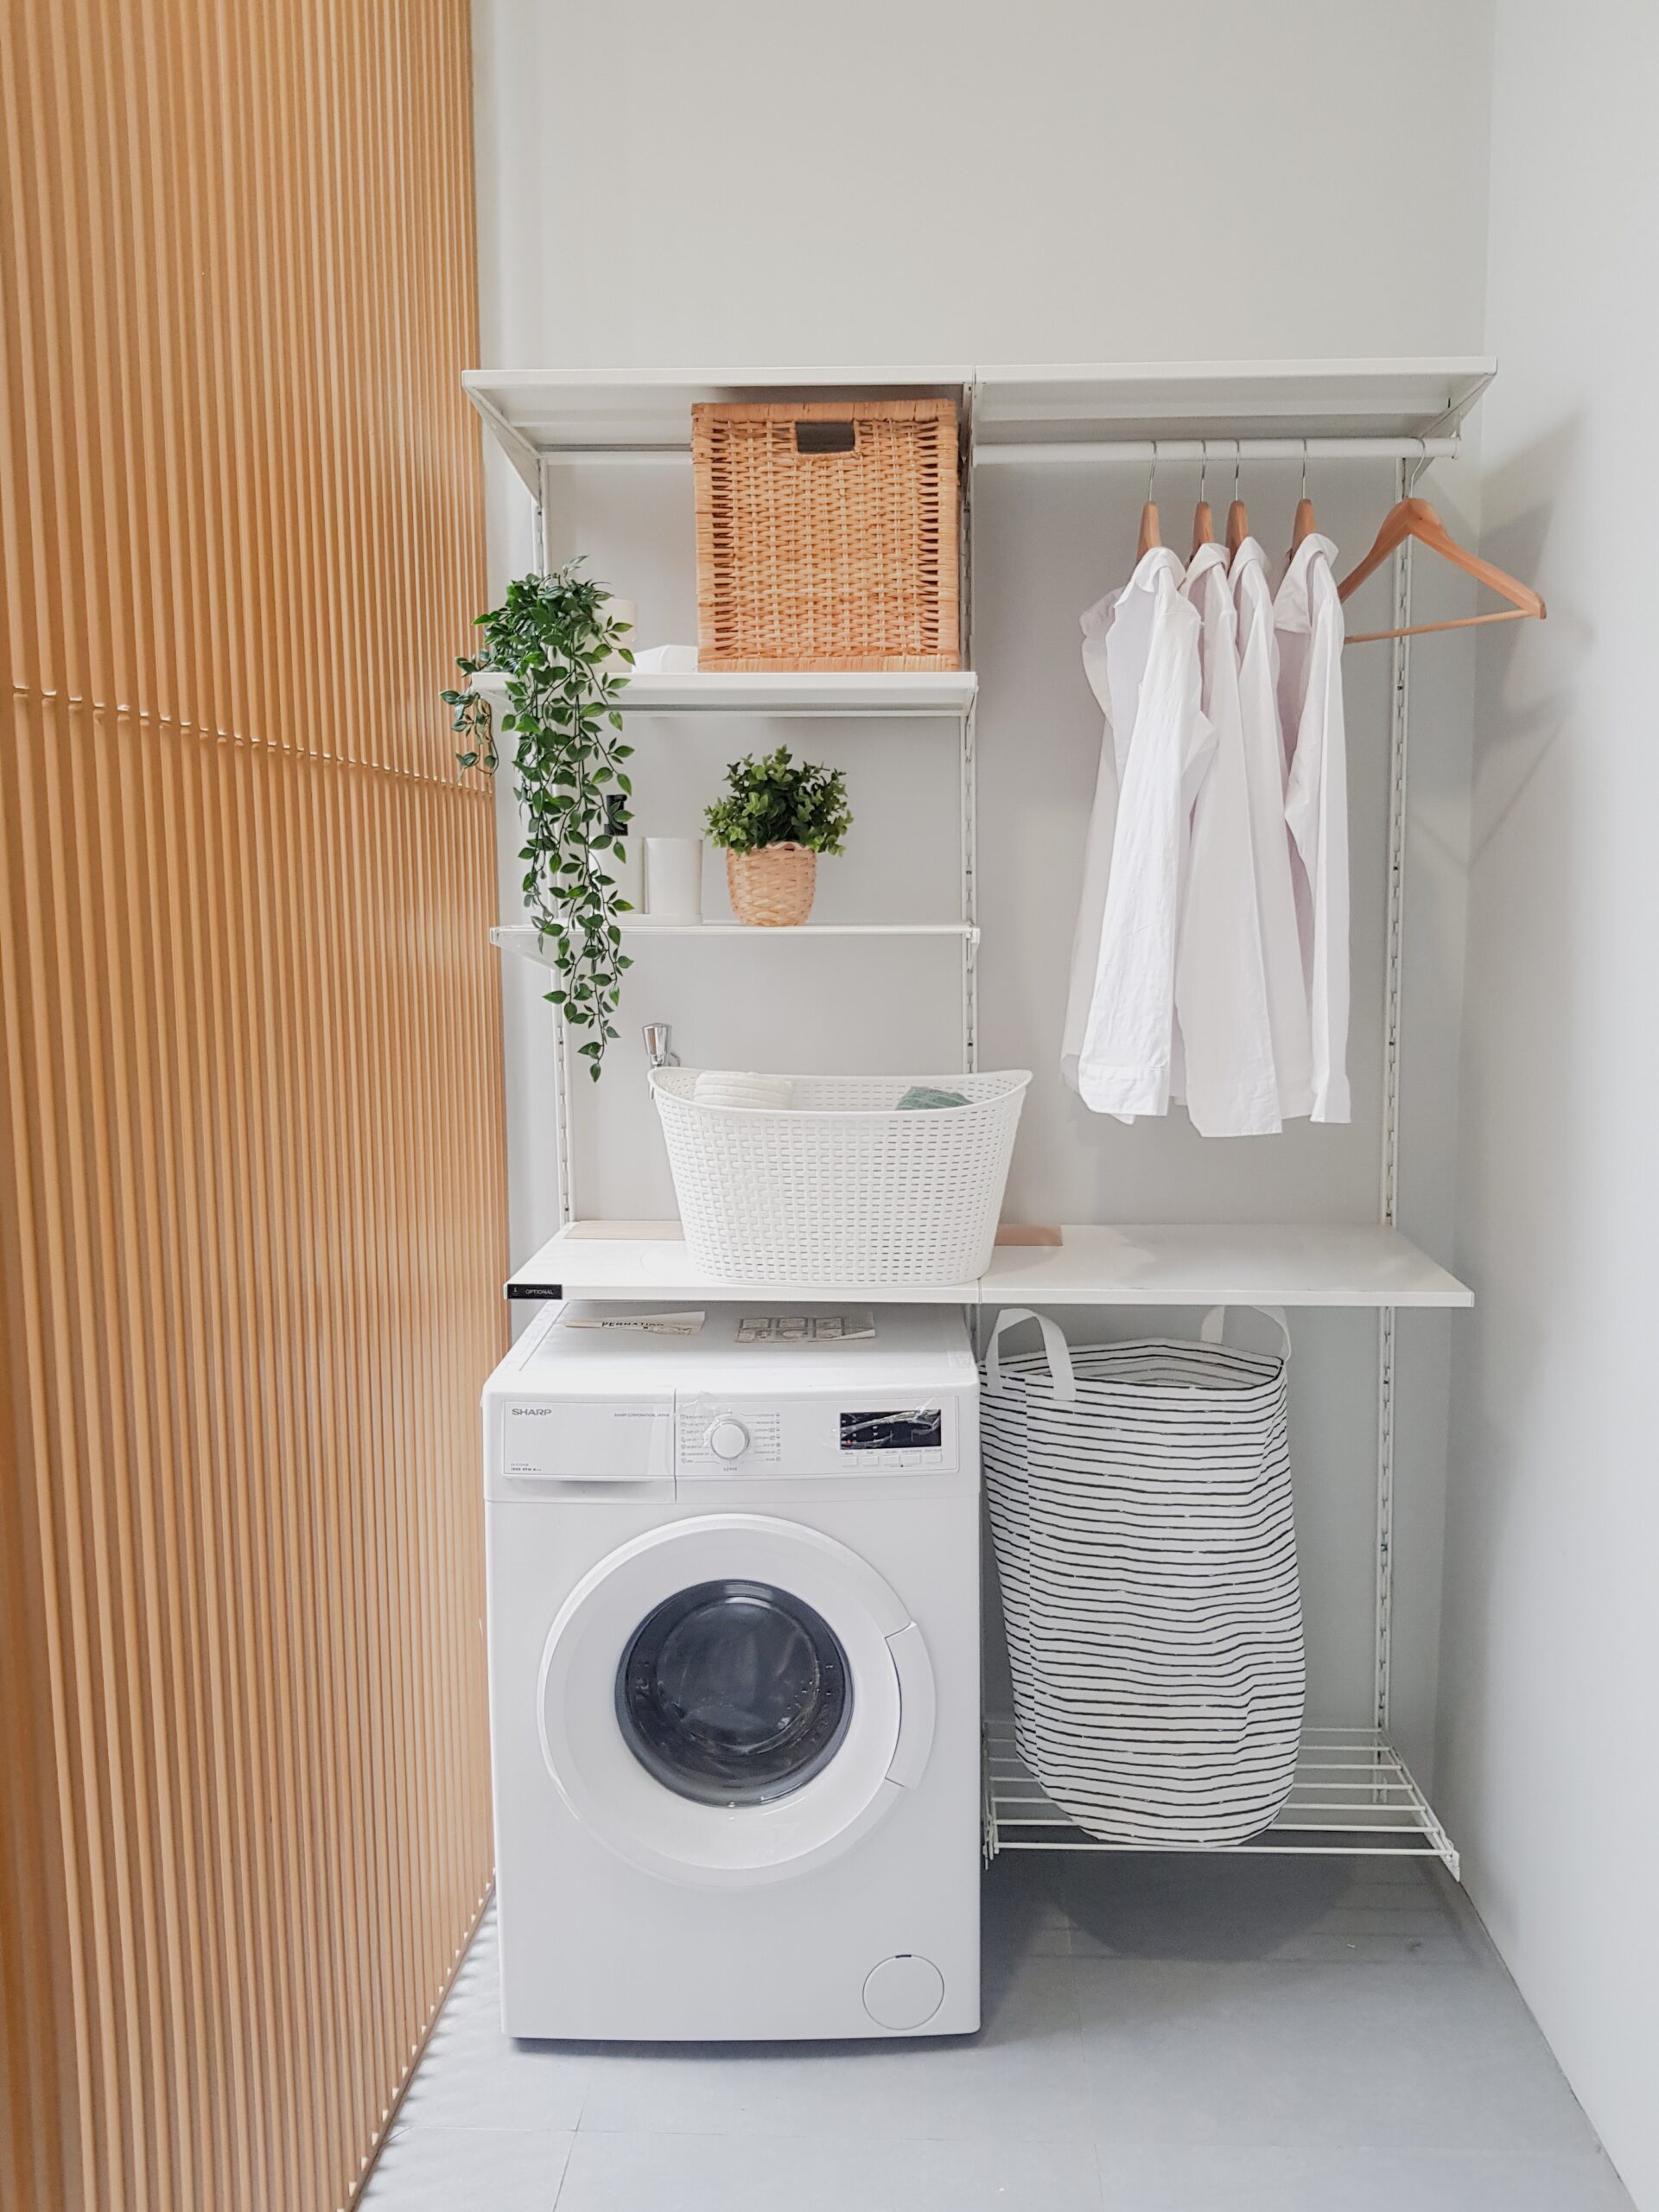 Small Laundry Room Ideas with Top-Loading Washer